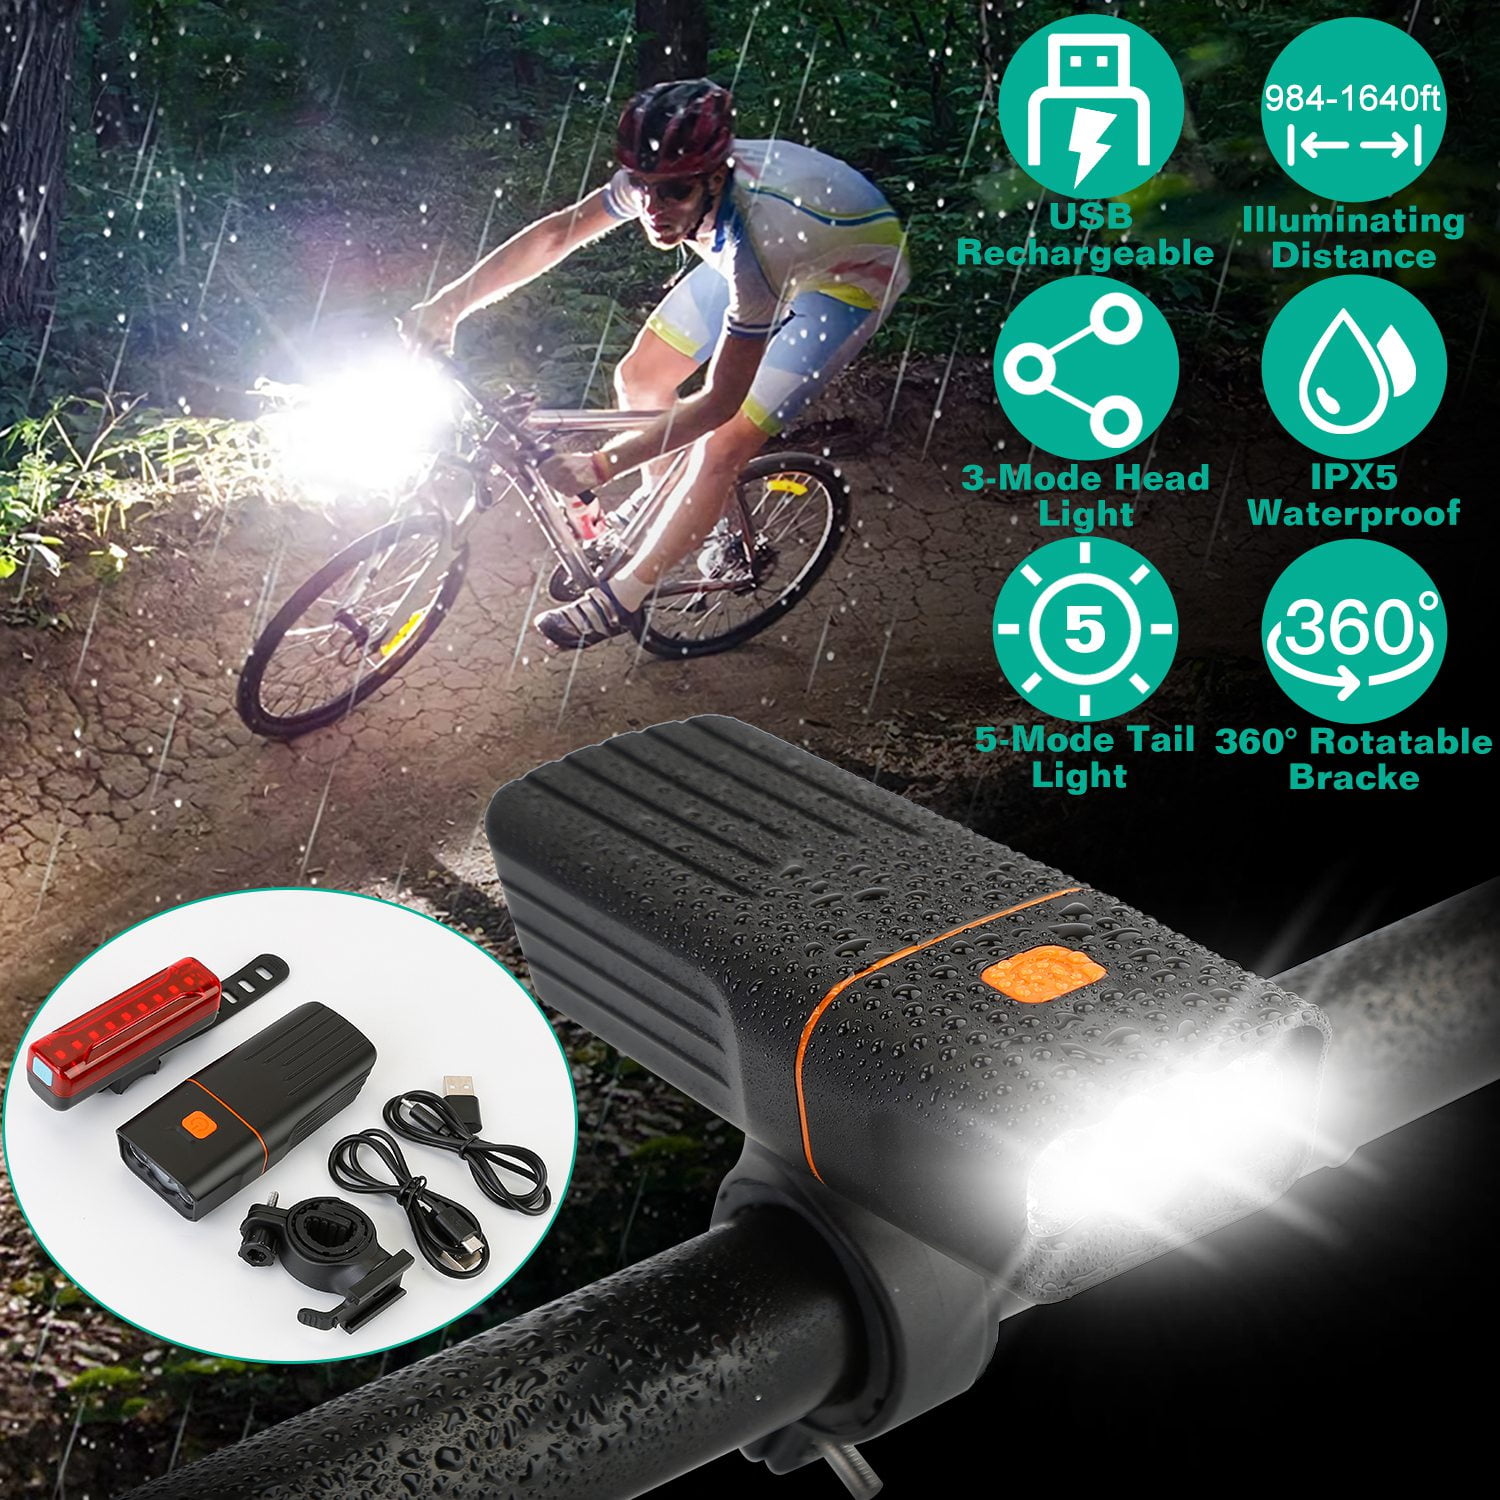 Portable and Adjustable USB Charging and can Double as an Outdoor Multi-Function Flashlight Universal The LED Bicycle Light has a Brightness of 300 lumens 5 Lighting Modes is Waterproof 